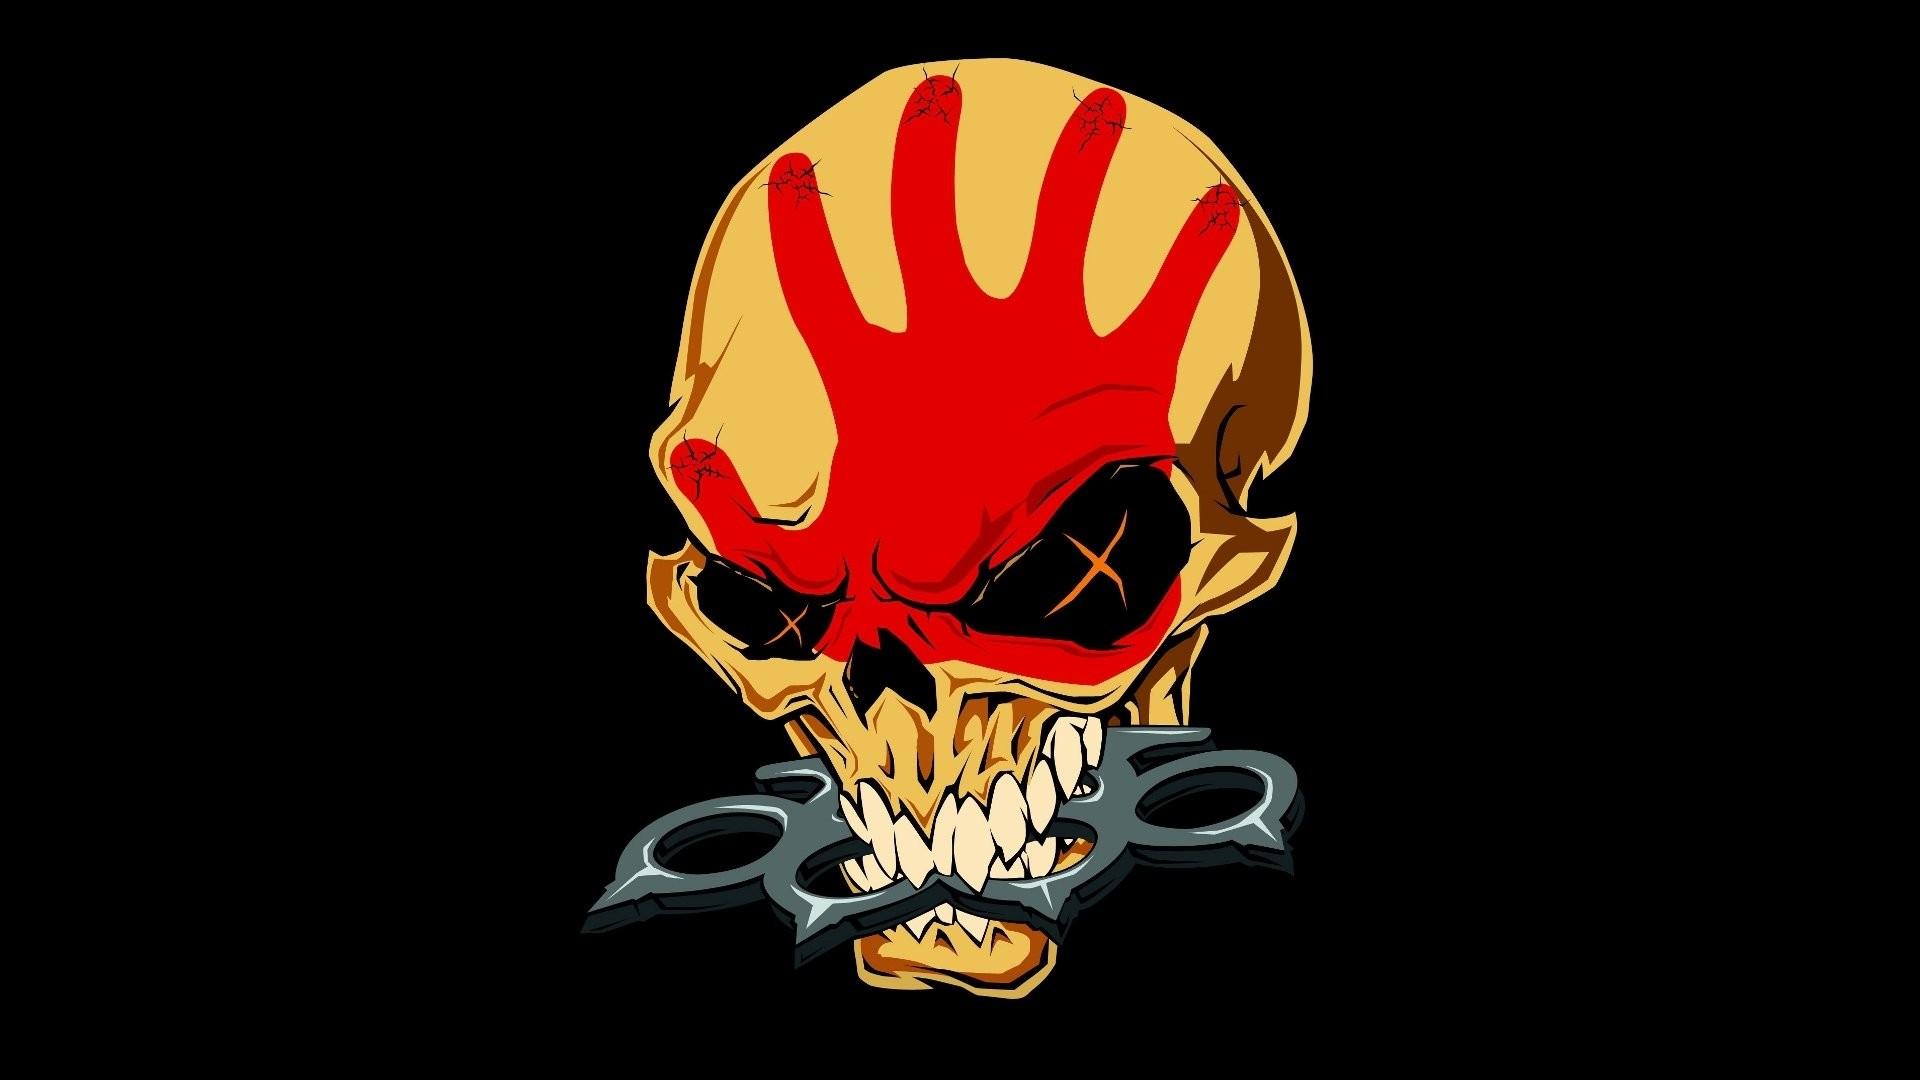 Wallpapers Five Finger Death Punch.